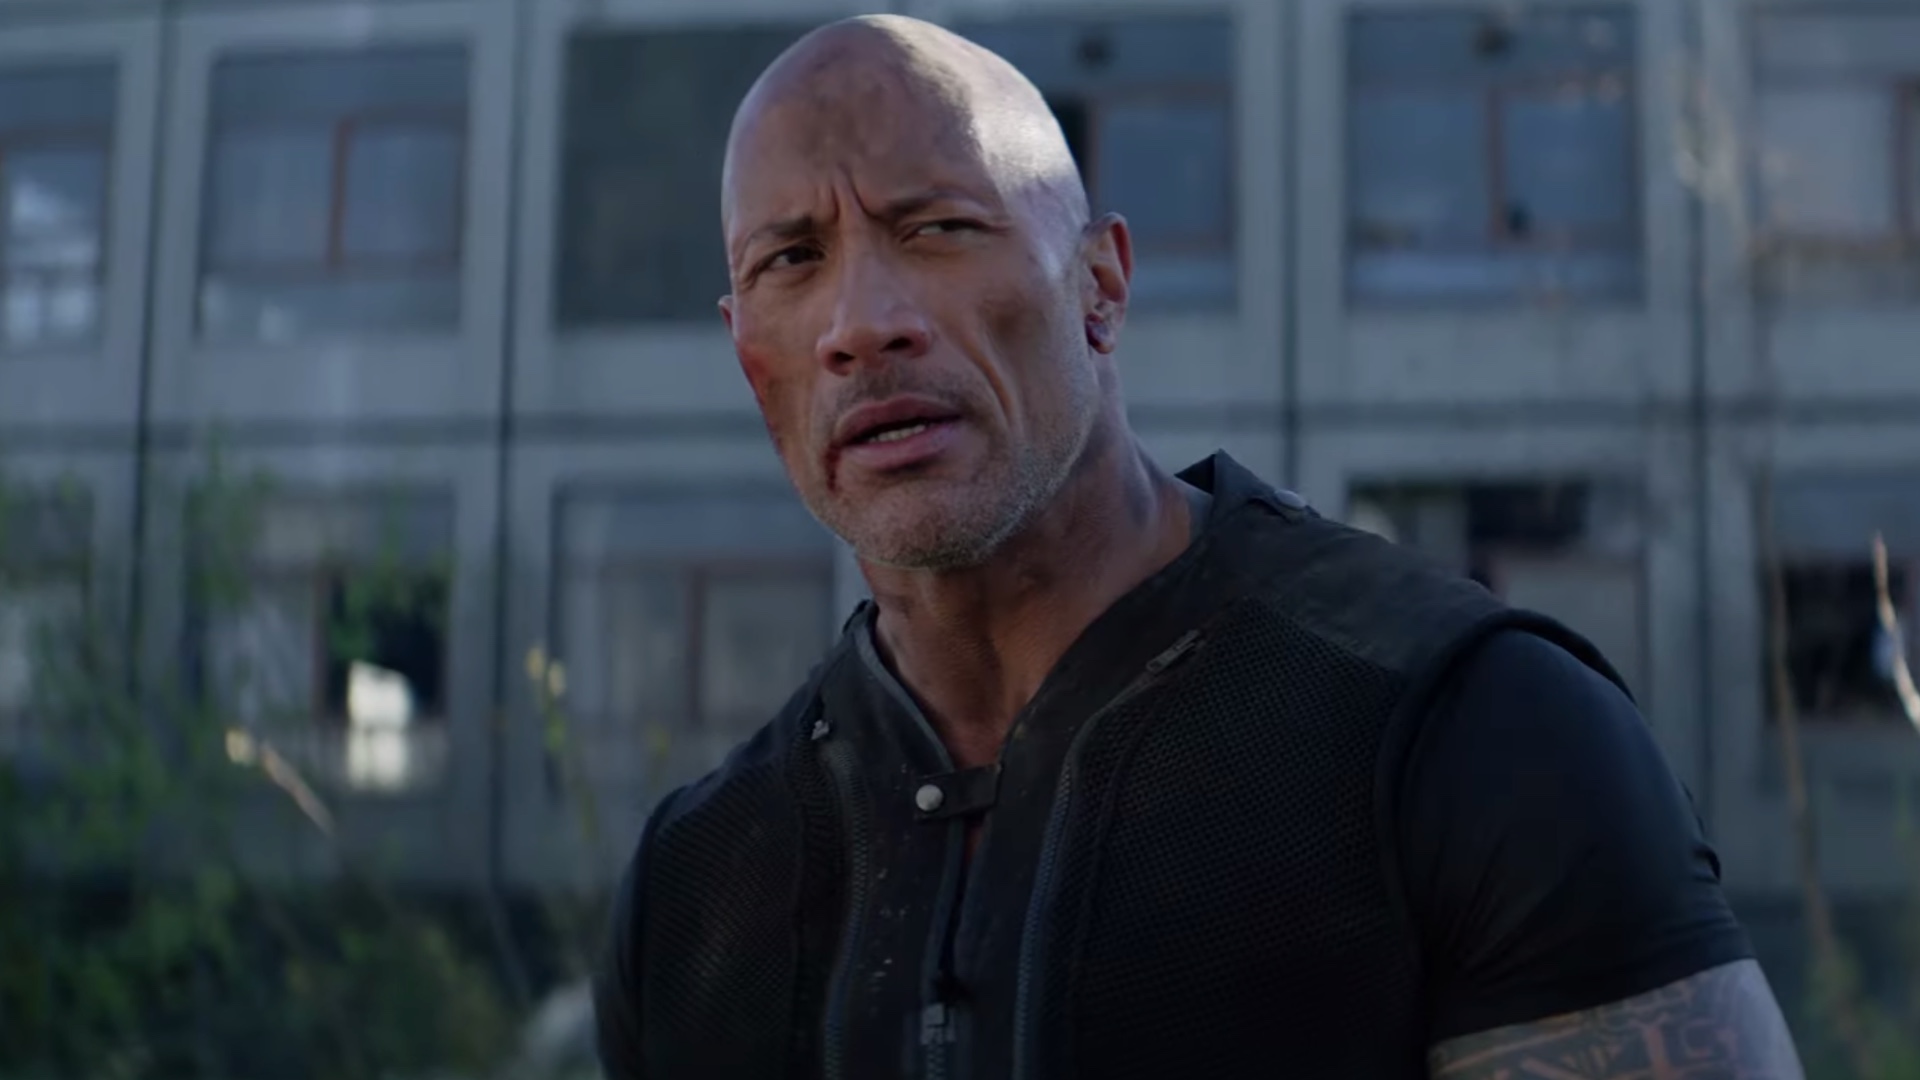 Super Bowl Trailer for FAST & FURIOUS PRESENTS: HOBBS & SHAW.